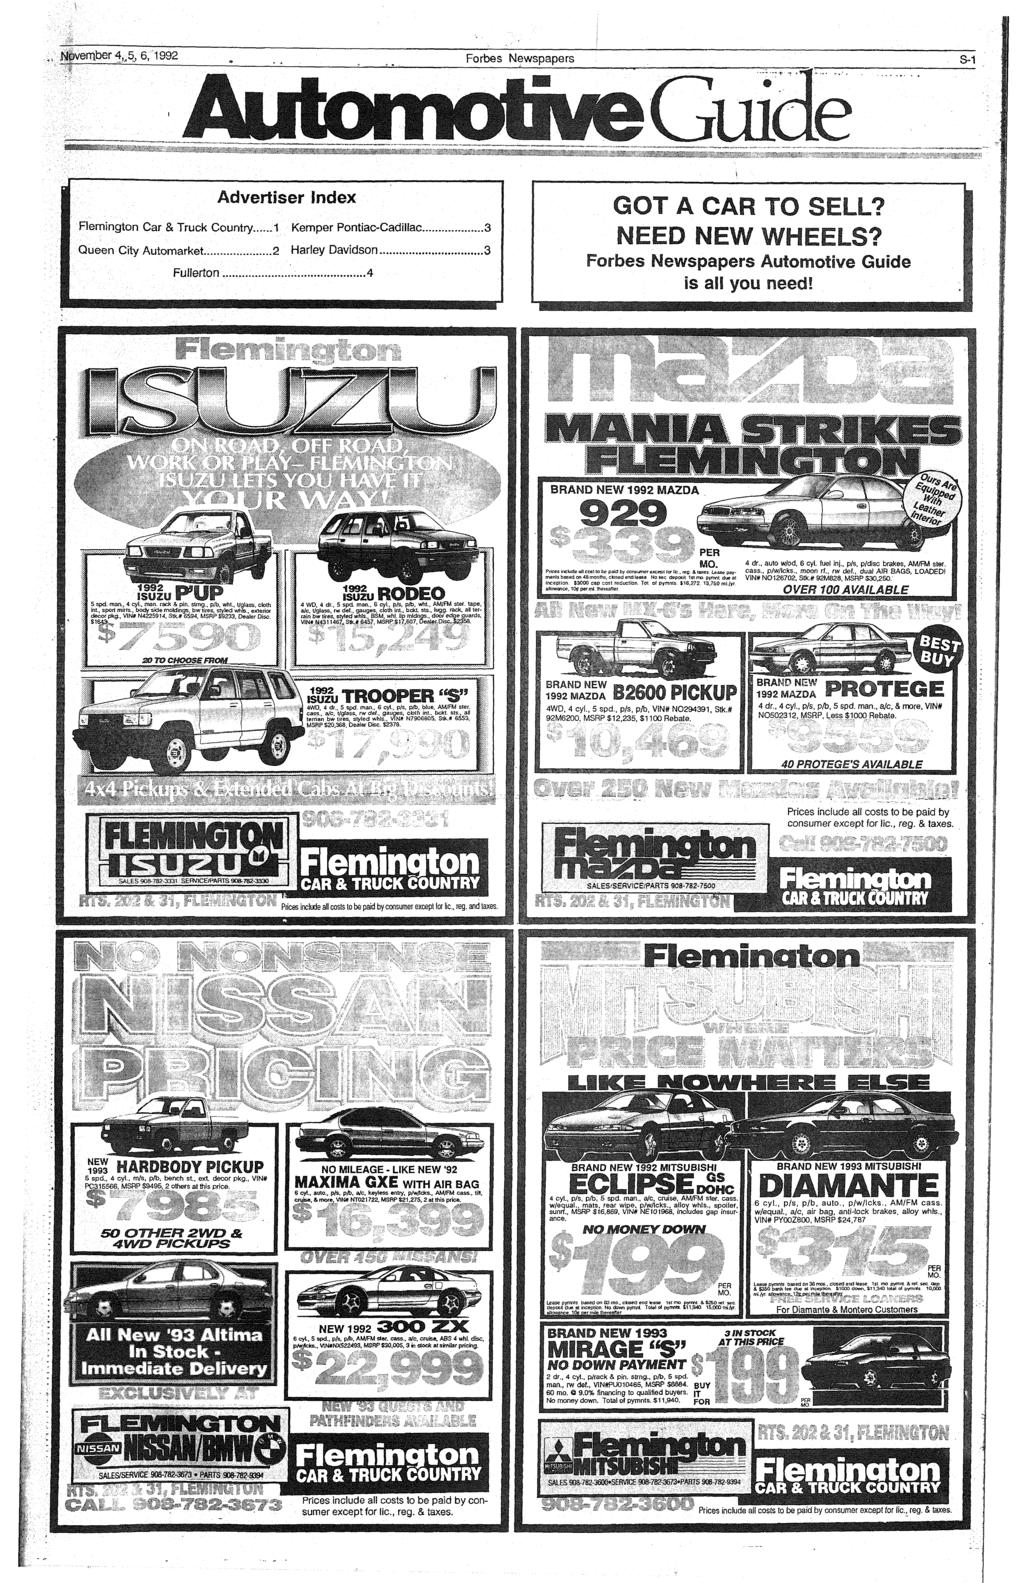 Nevernber 4^,5, 6, 1992 Forbes Newspapers S-1 Advertiser Index Flemington Car & Truck Country...1 Kemper Pontiac-Cadillac Queen City Automarket Harley Davidson...2 Fullerton R GOT A CAR TO SELL?